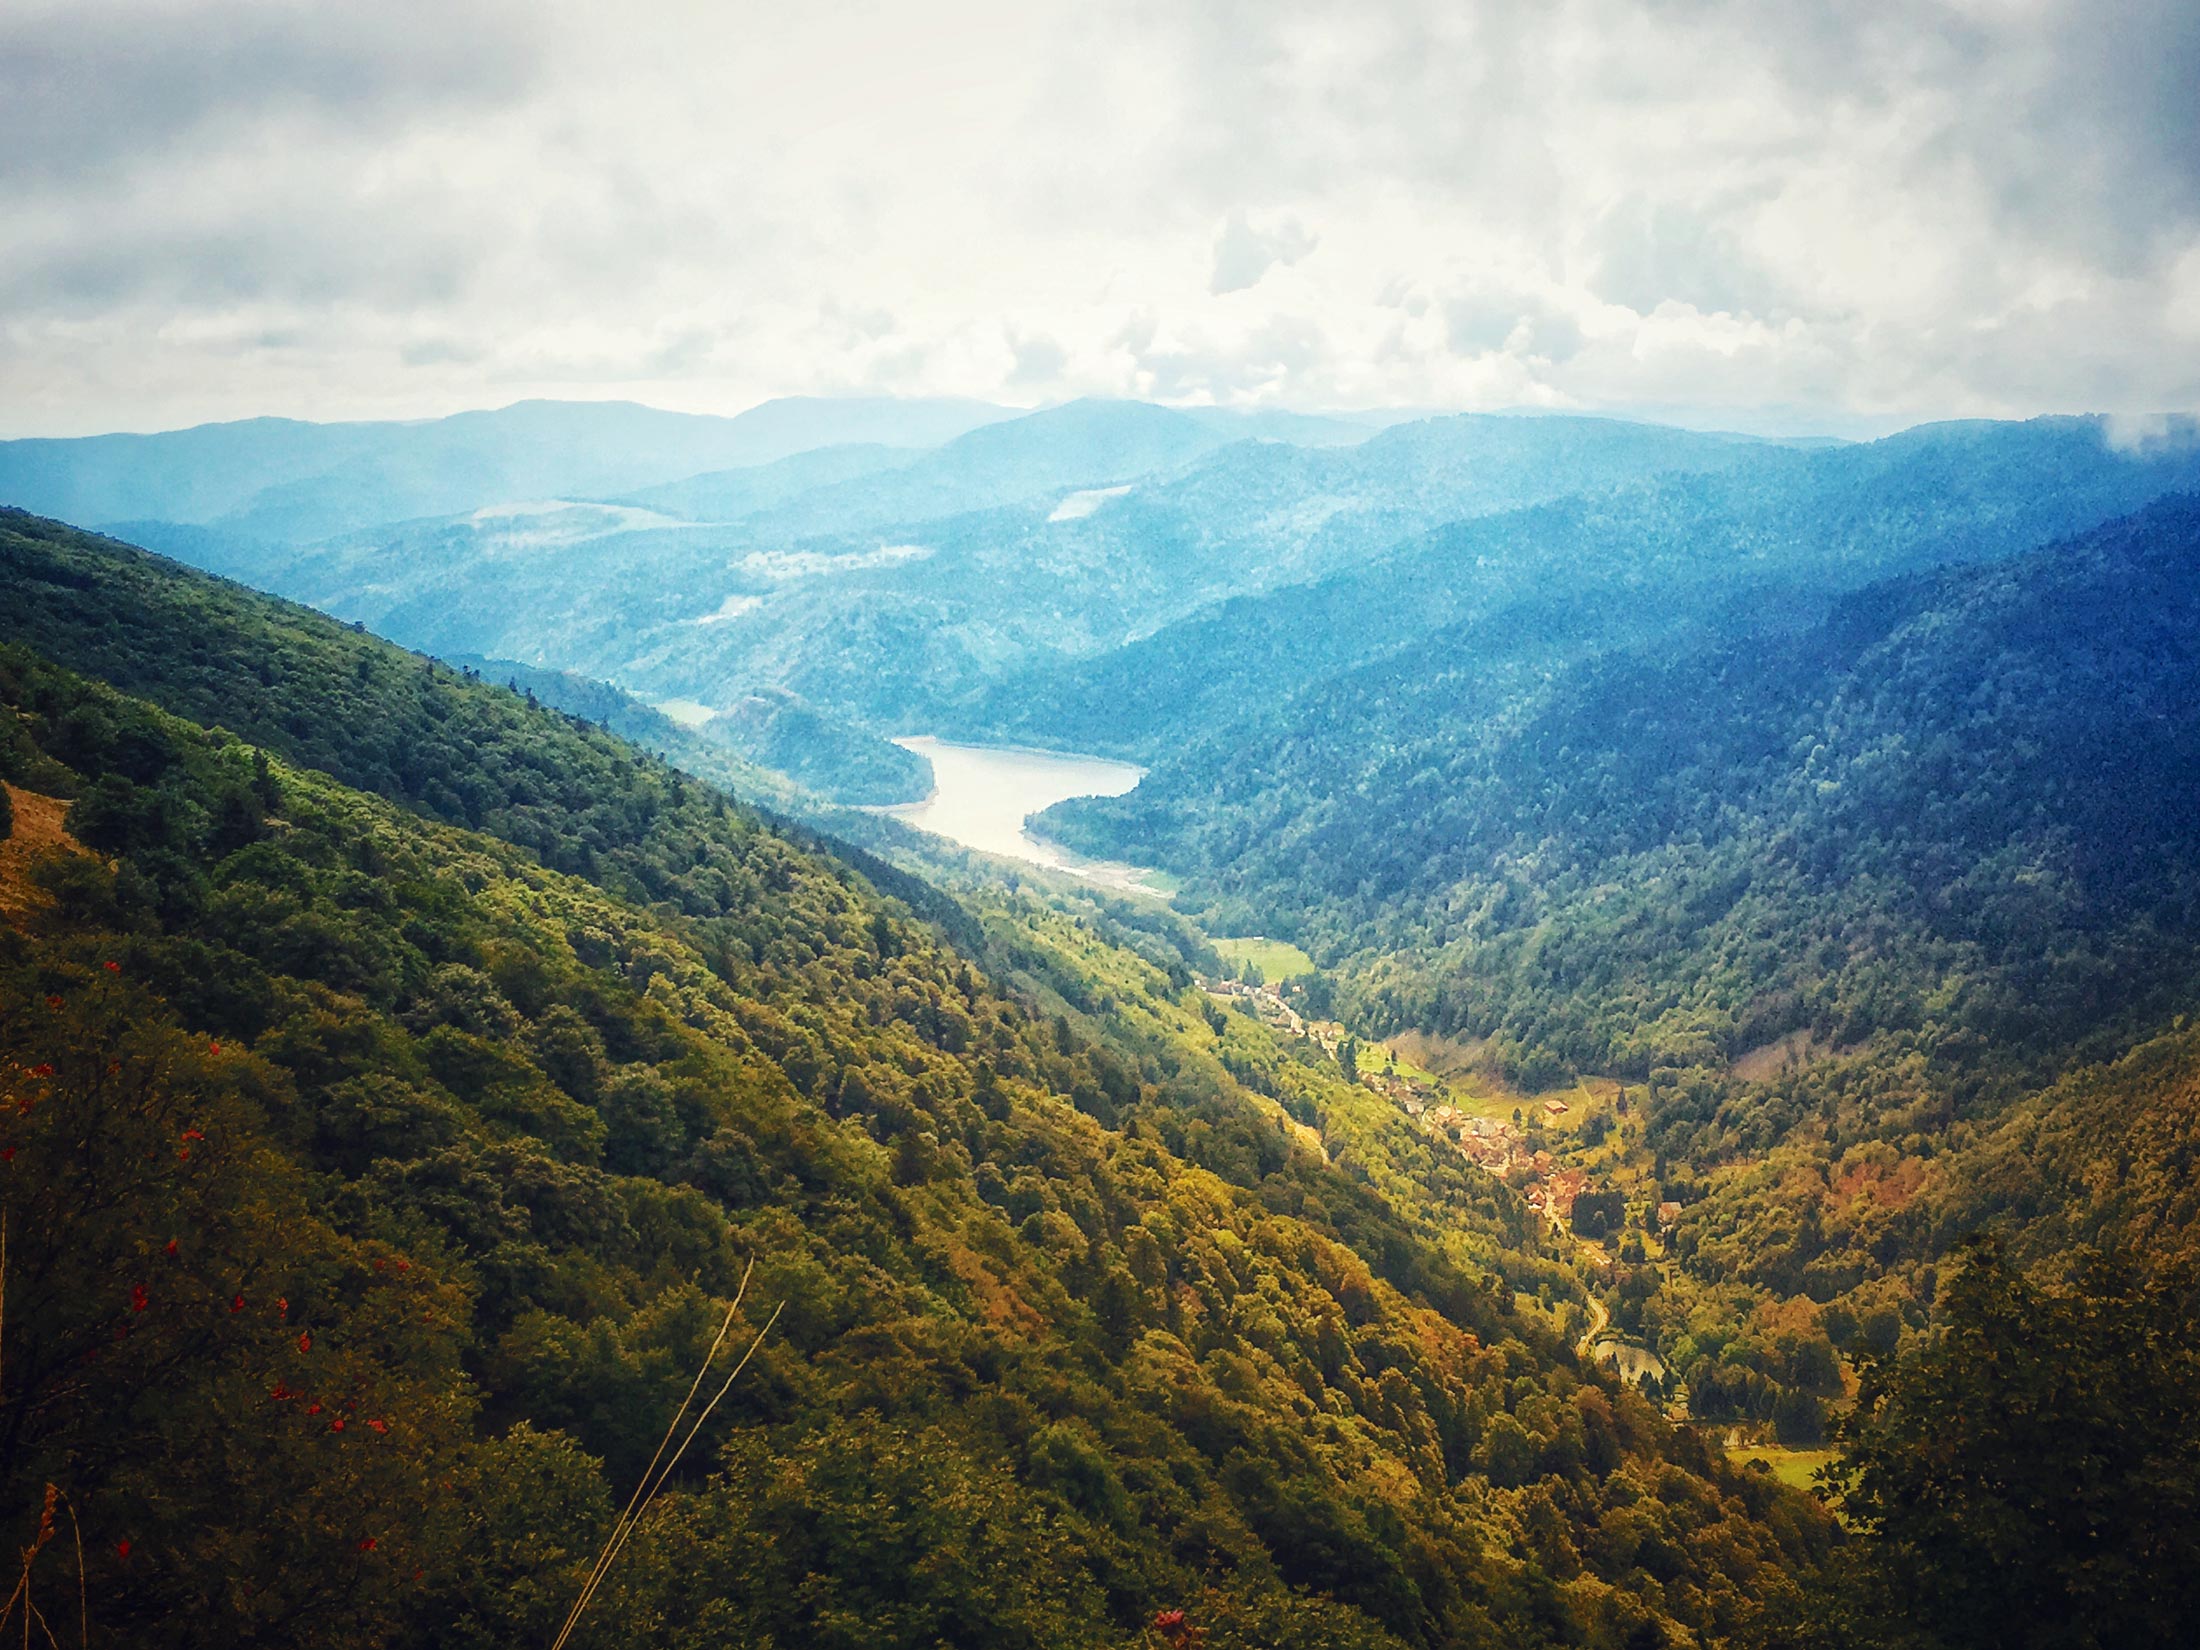 A delightful road trip through the Vosges mountains